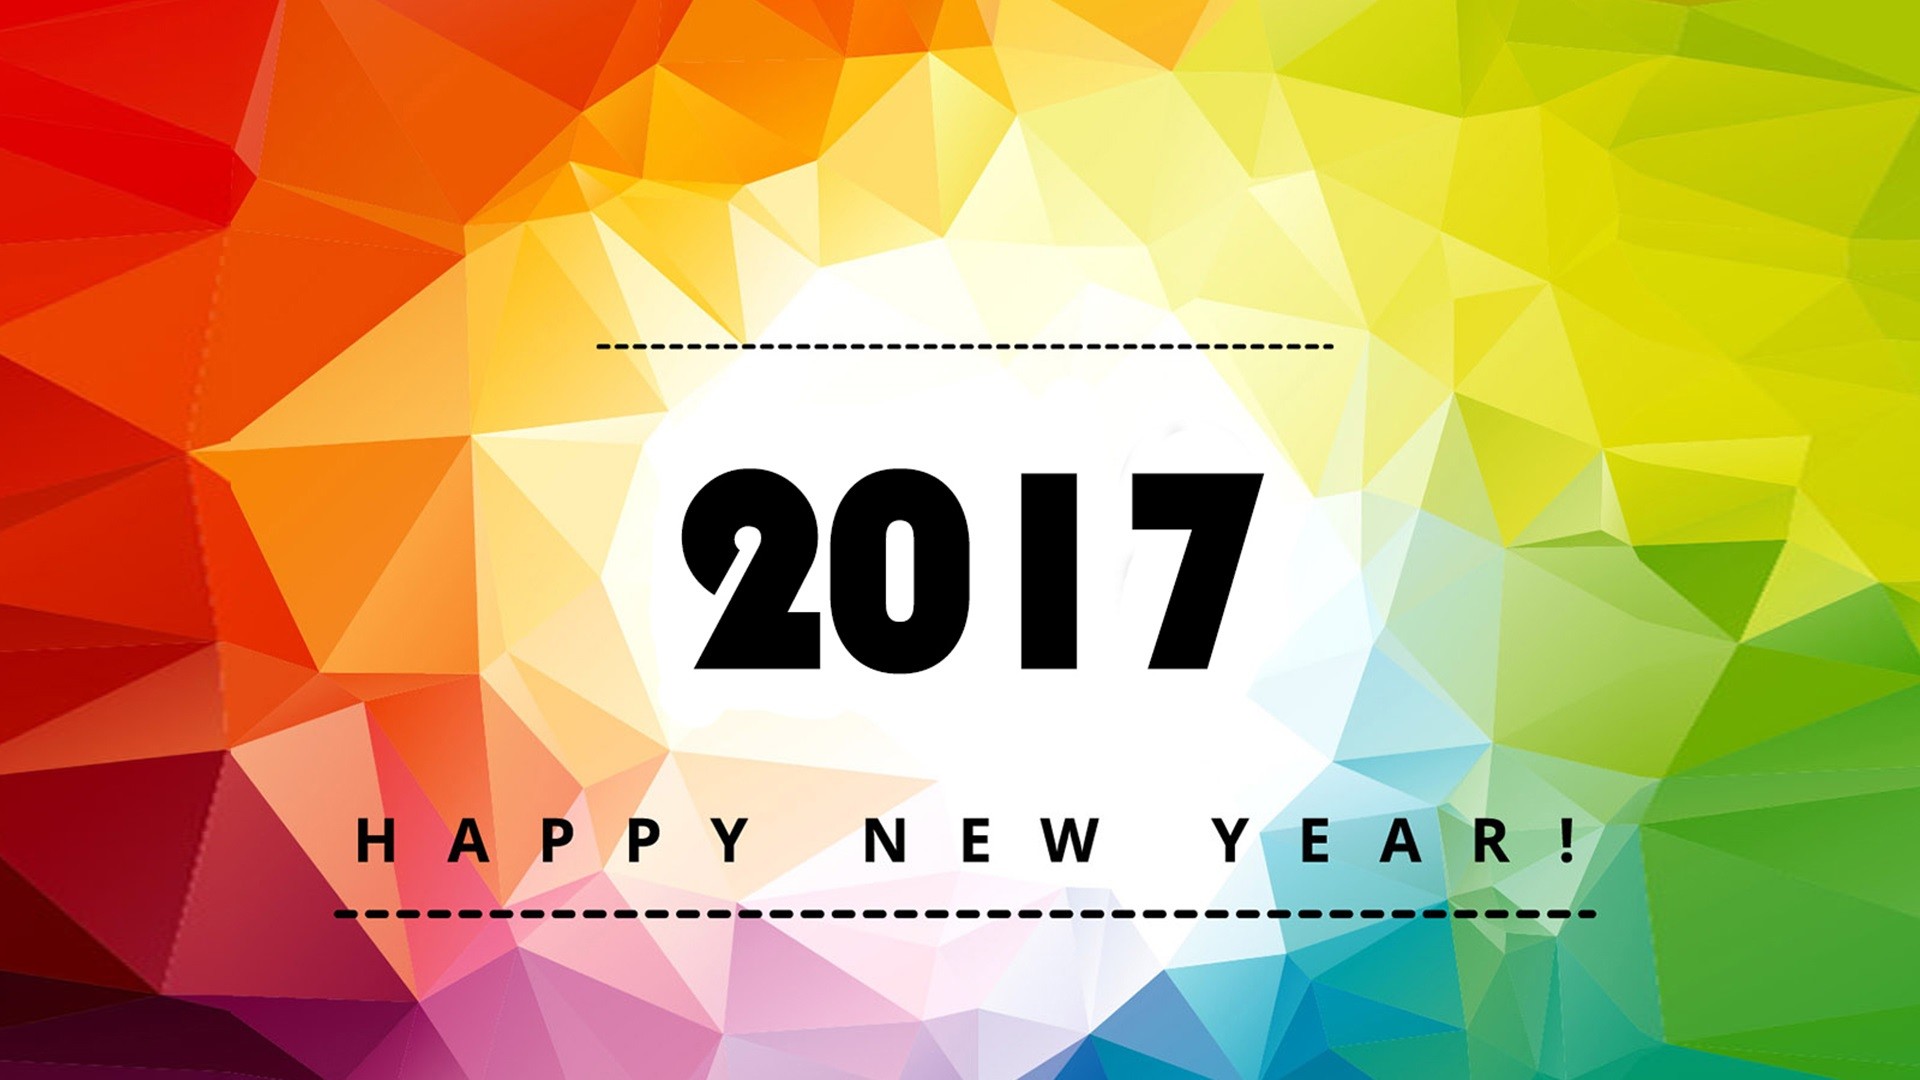 1920x1080 Wallpapers happy new year 2017 